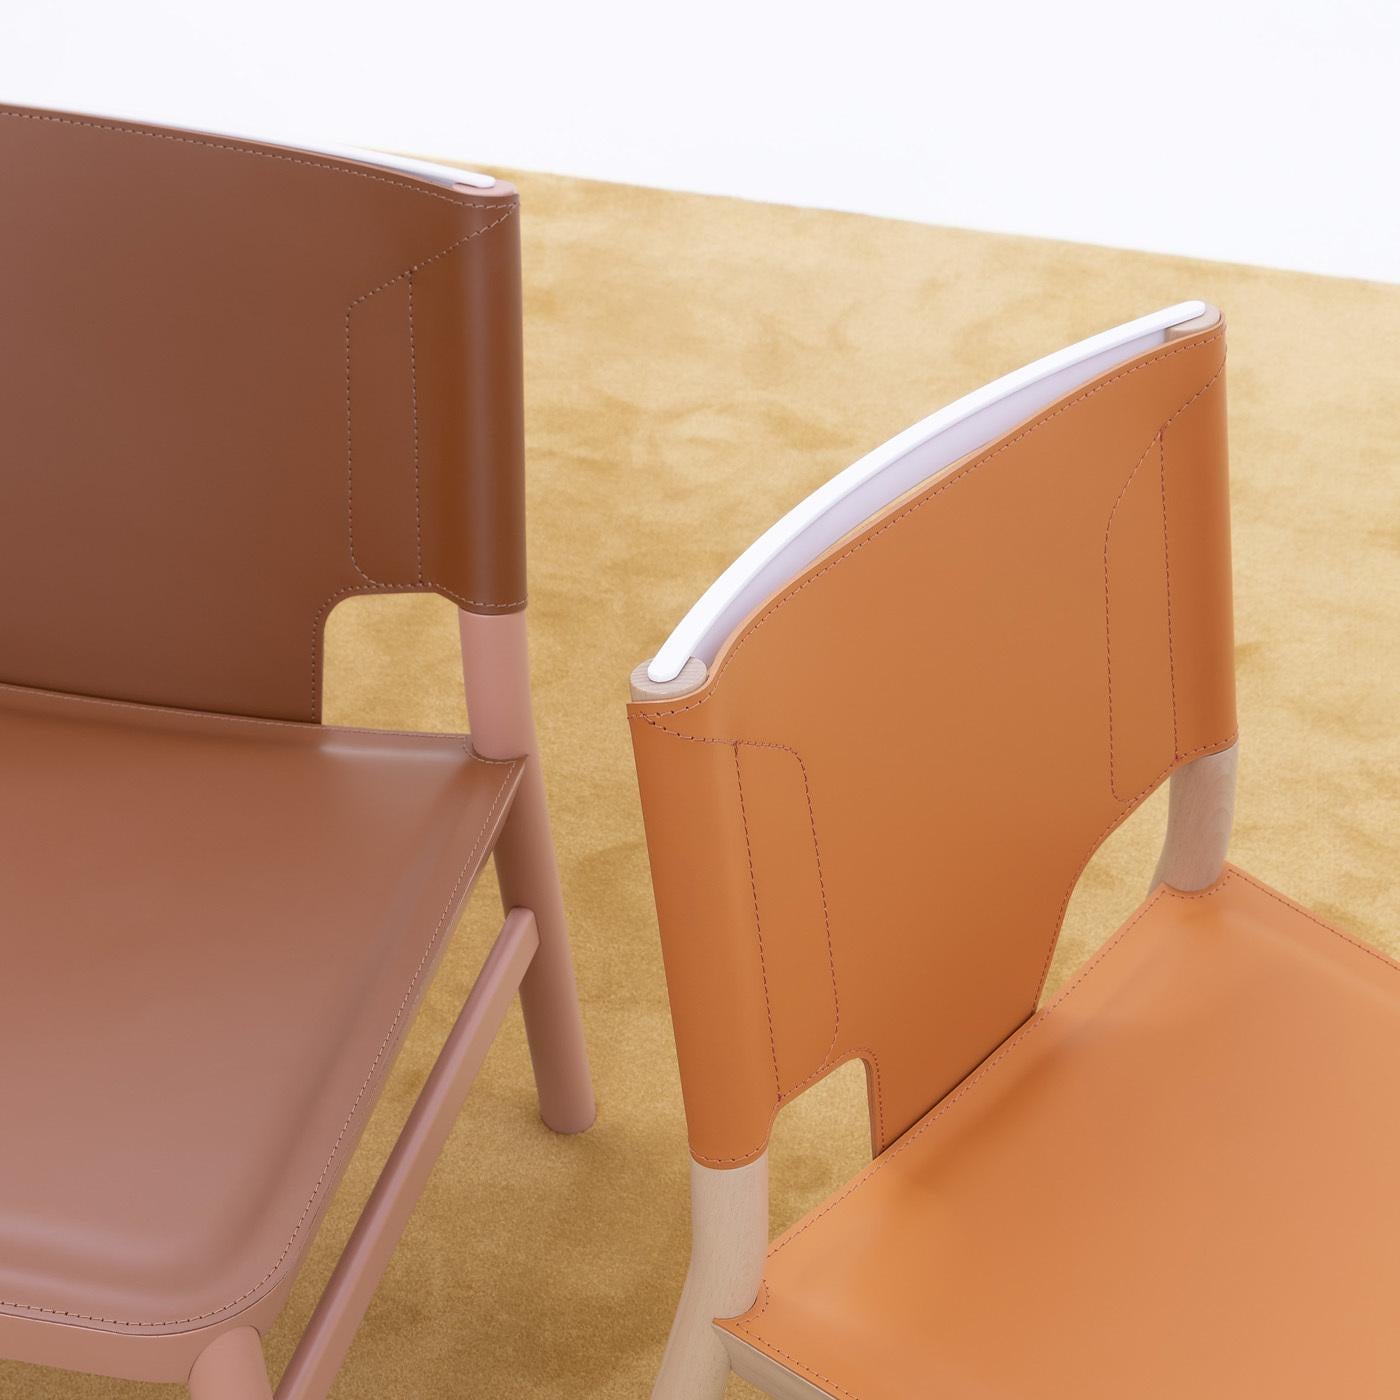 Solid beechwood and orange leatherette create a happy harmony between stability and agility in the Marimba dining chair by Emilio Nanni. Designed in 2018, the dining chair comes from a complete collection of seating options and comes in a variety of